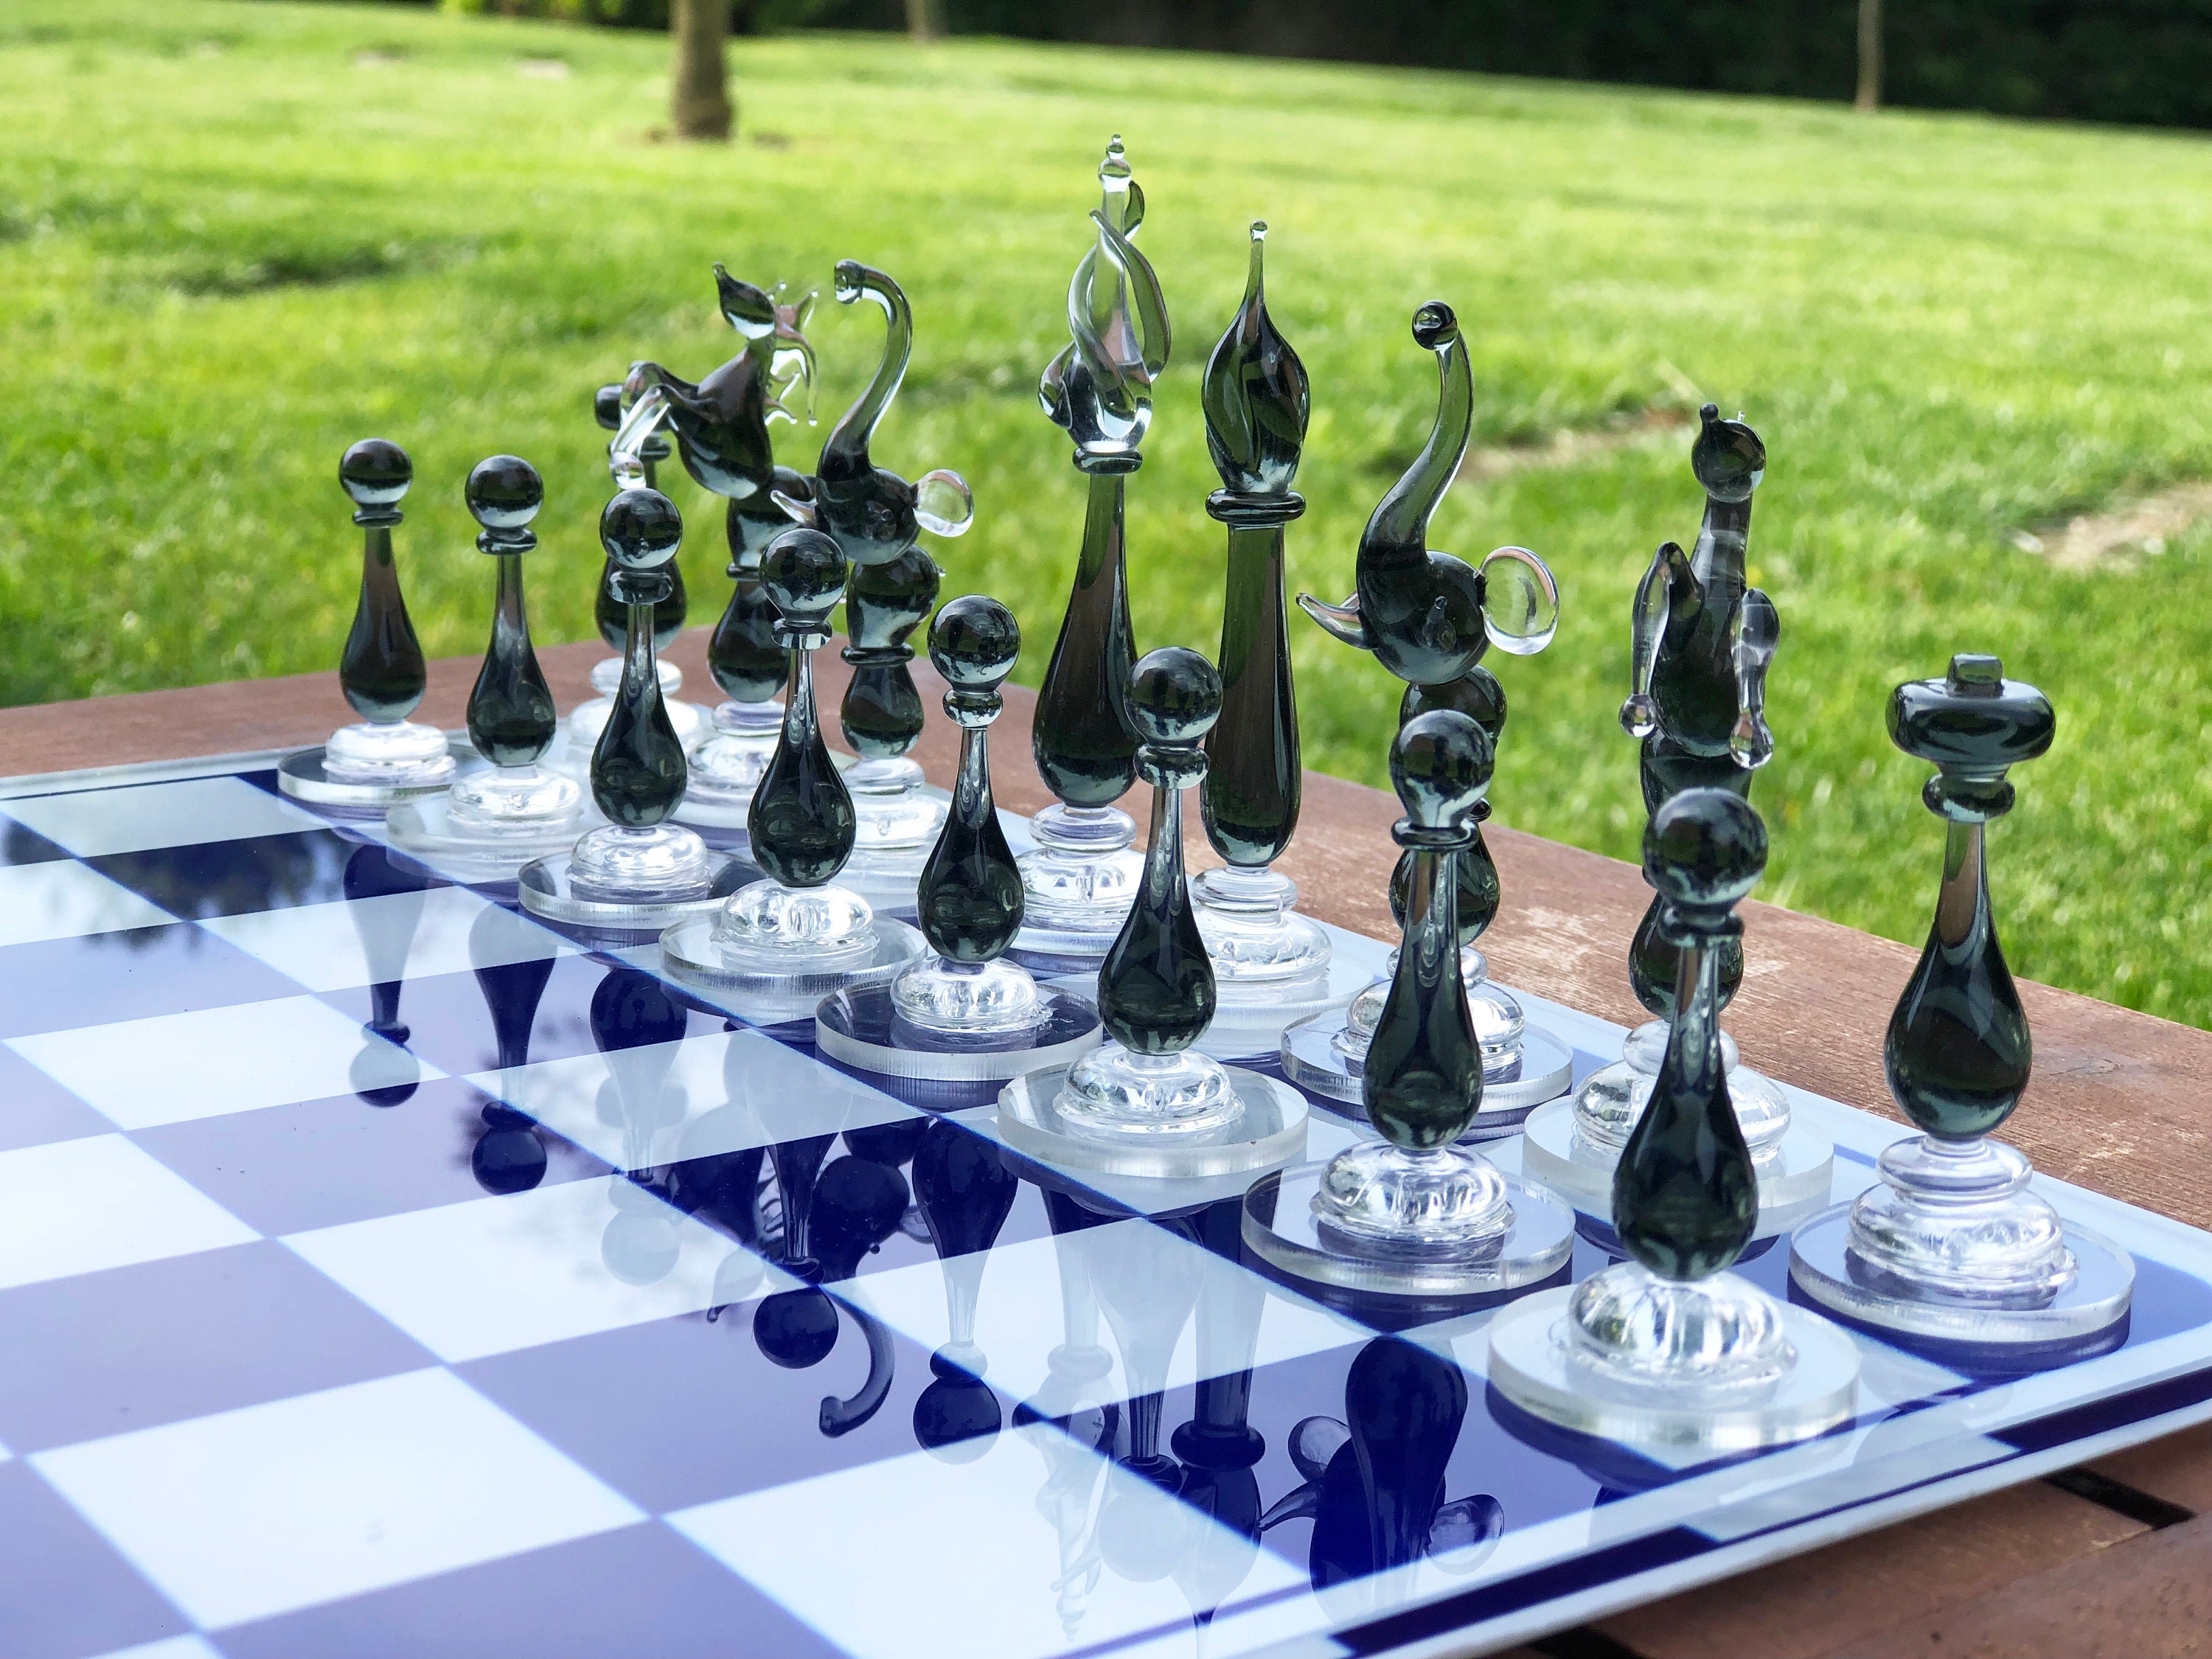 Luxury Unique Chess Set, Handmade Murano Glass Chess Board and Pieces,  Black and Blue Chess Set -  Denmark